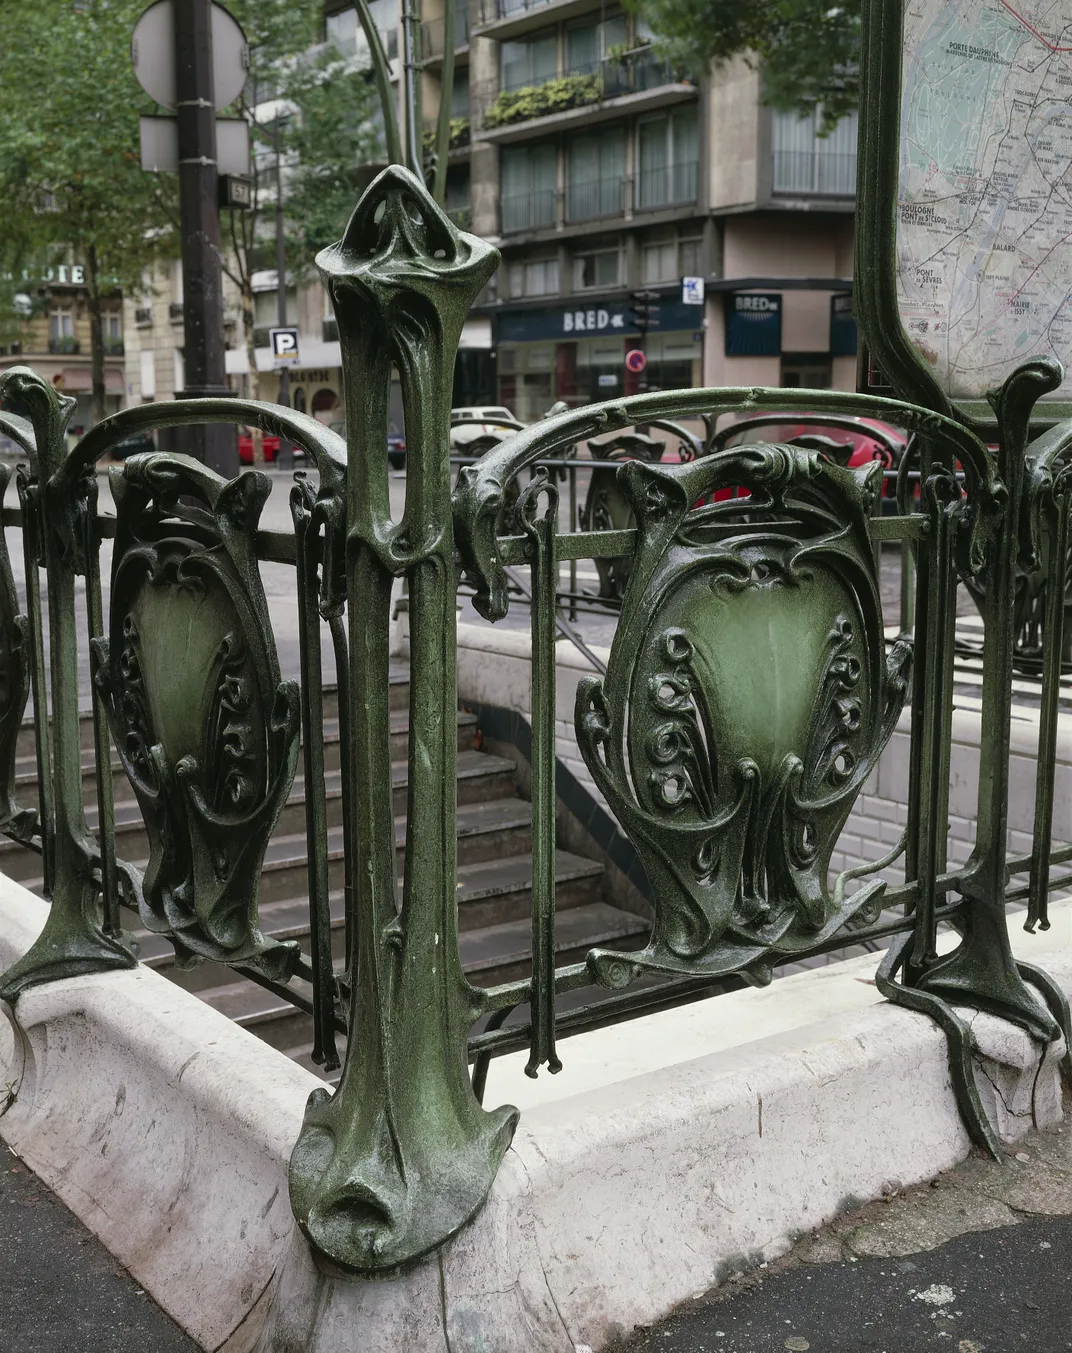 Detail of the Art Nouveau railings at the entrance to the Paris metro, the work of the architect Hector Guimard